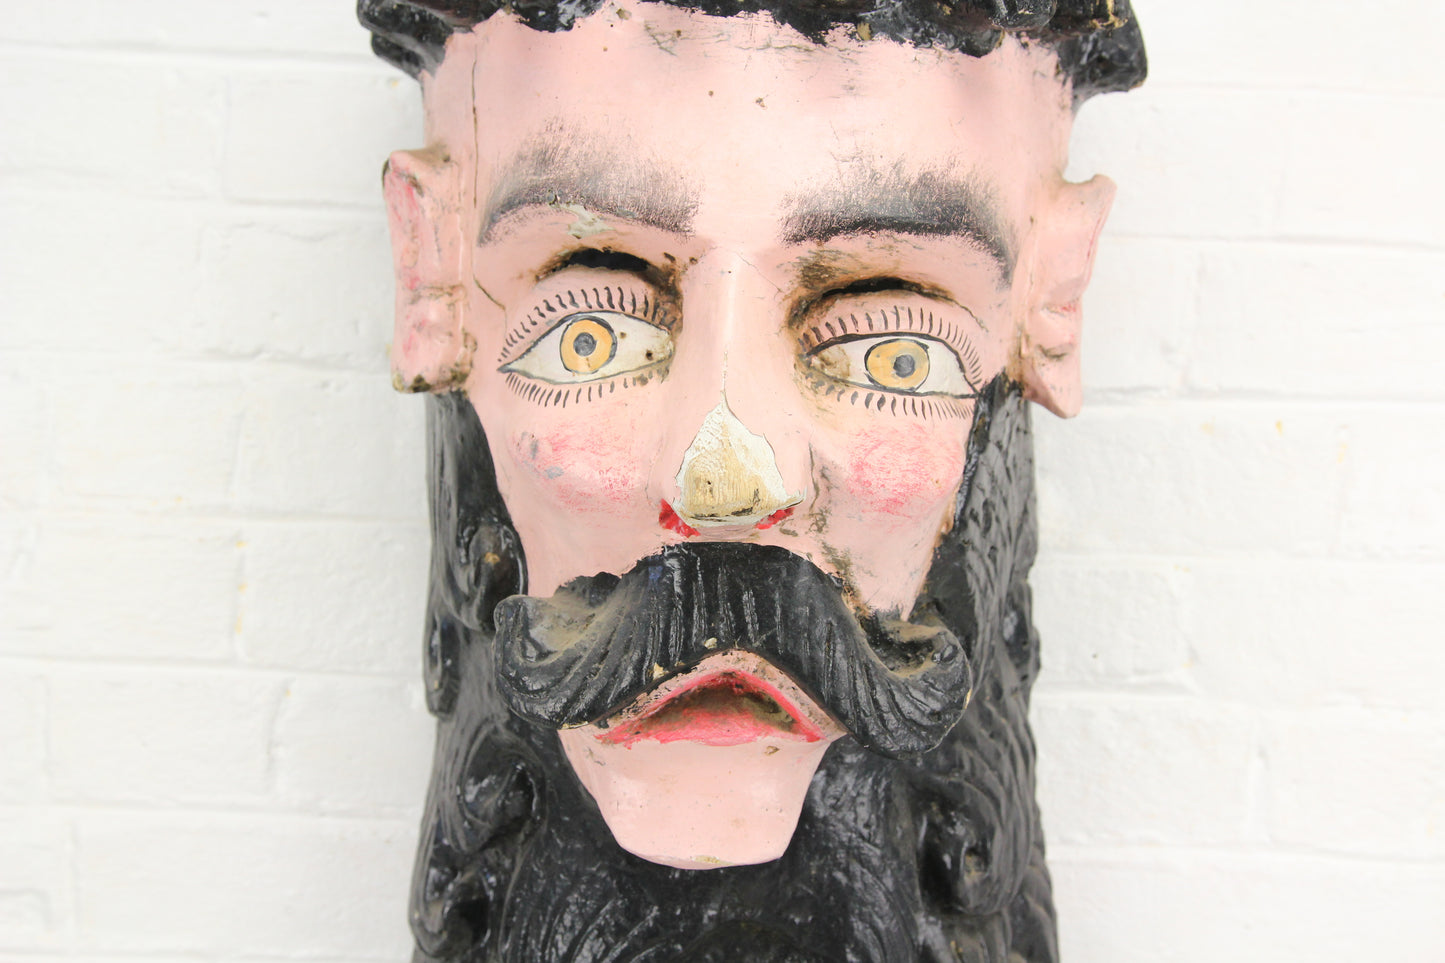 Antique Hand Carved & Painted Bearded Man Odd Fellows Parade Mask